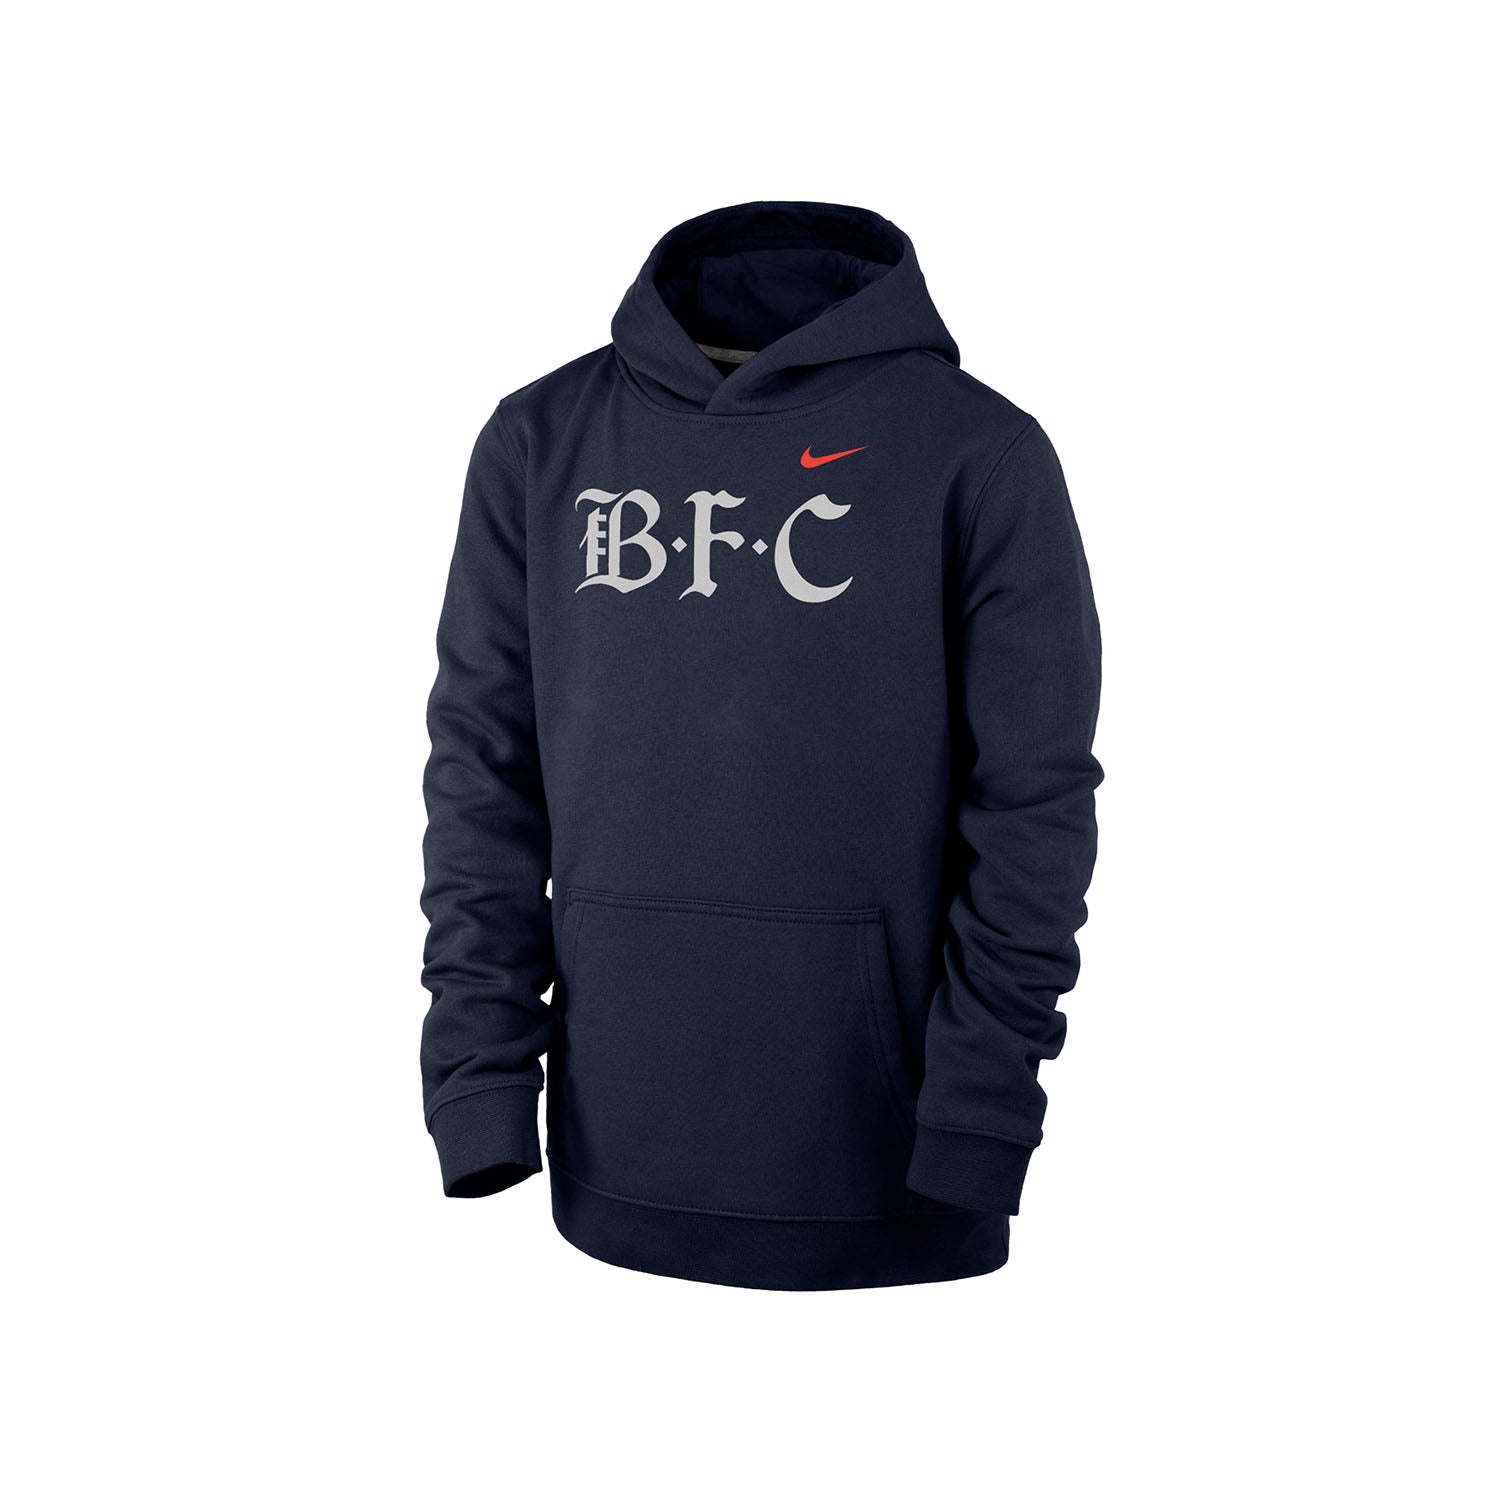 Youth Nike Bay FC Club Fleece Navy Hoodie - Angled Front Left View